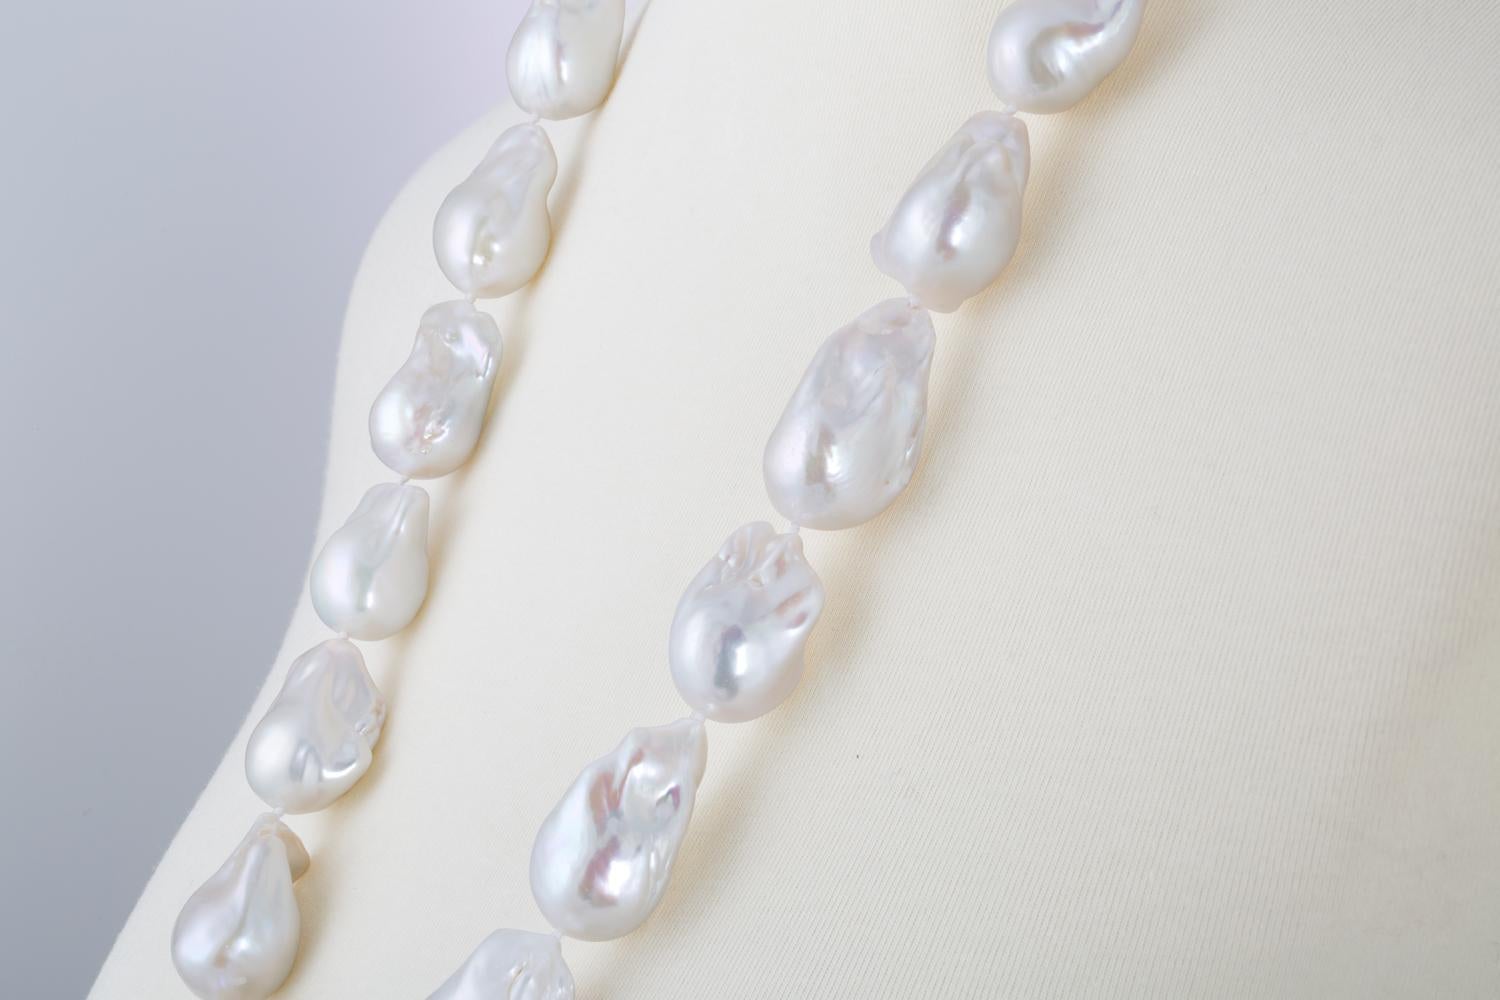 This necklace features Chinese Freshwater Baroque shaped pearl necklace measuring 18x20mm. These pearls are strung to 31 inches endless. These are among the largest Freshwater pearls that are cultivated. Alternative clasp options are available. The